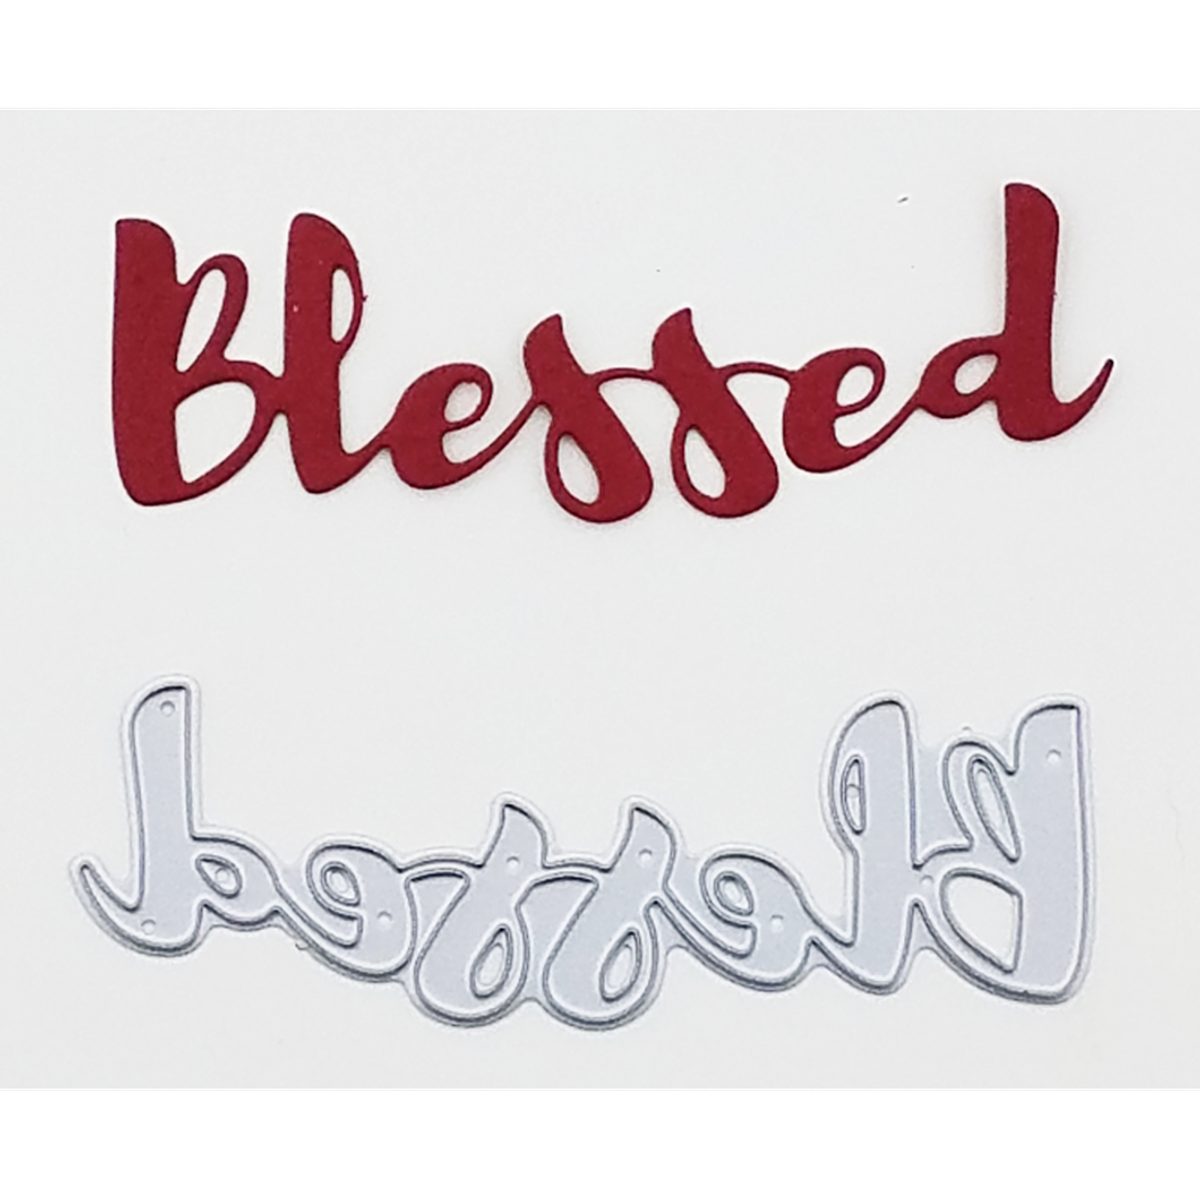 &quot;Blessed&quot; Brush Script Word &amp; Sentiment Die by Kat Scrappiness - Kat Scrappiness